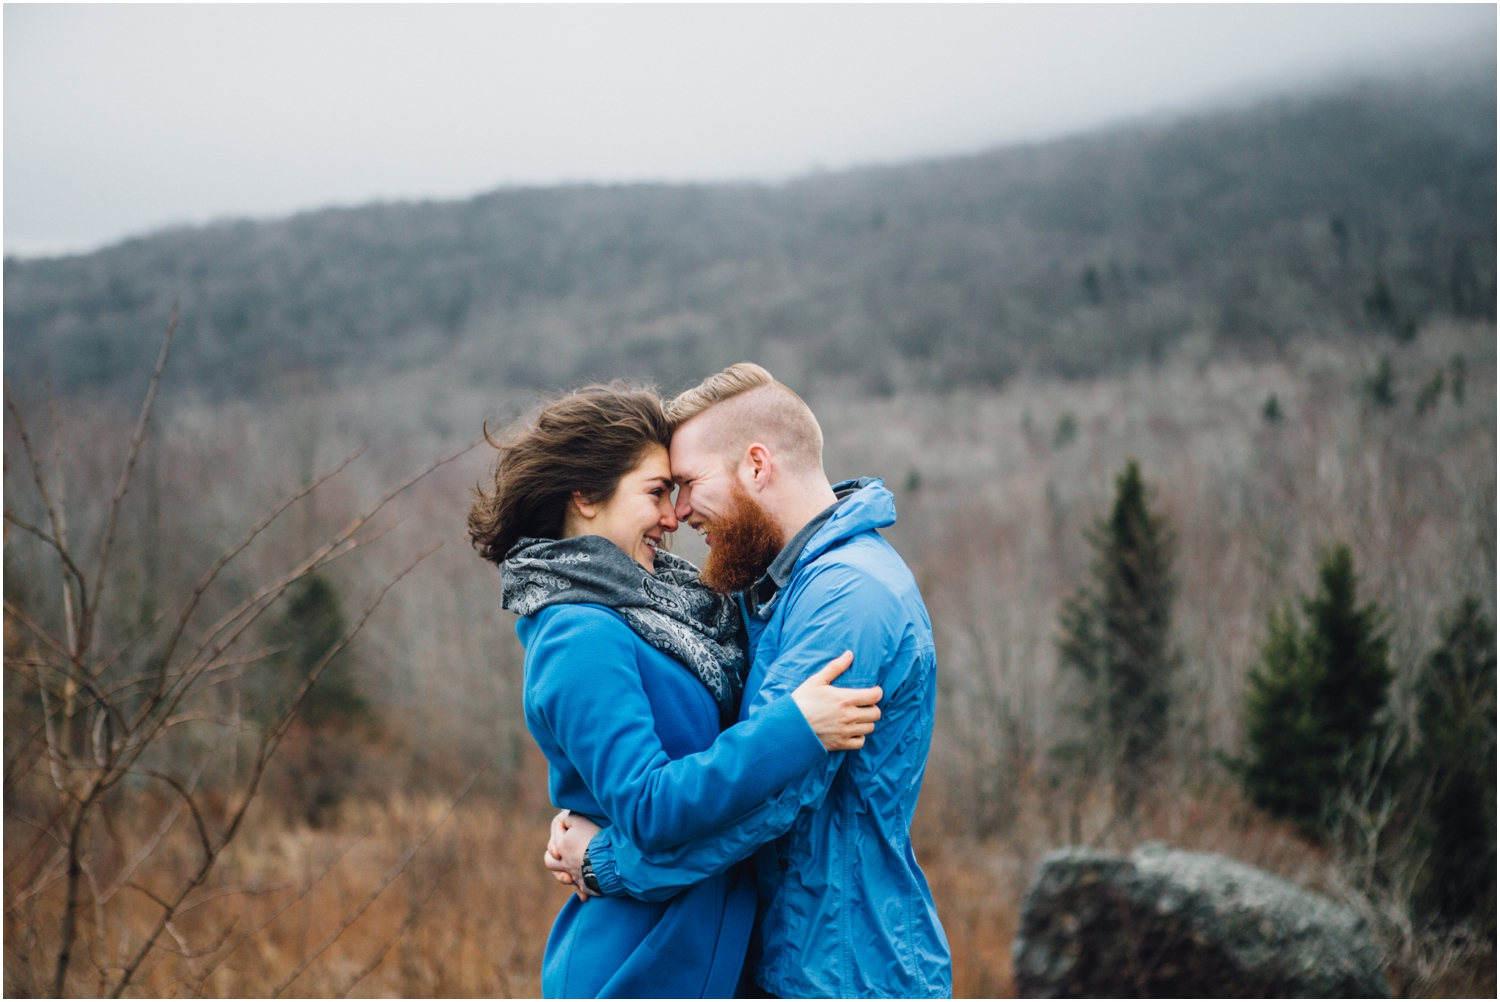 katy-sergent-photography-grayson-highlands-engagement-session-mouth-of-wilson-virginia-damascus-appalachian-trail-tennessee-wedding-elopement_0023.jpg